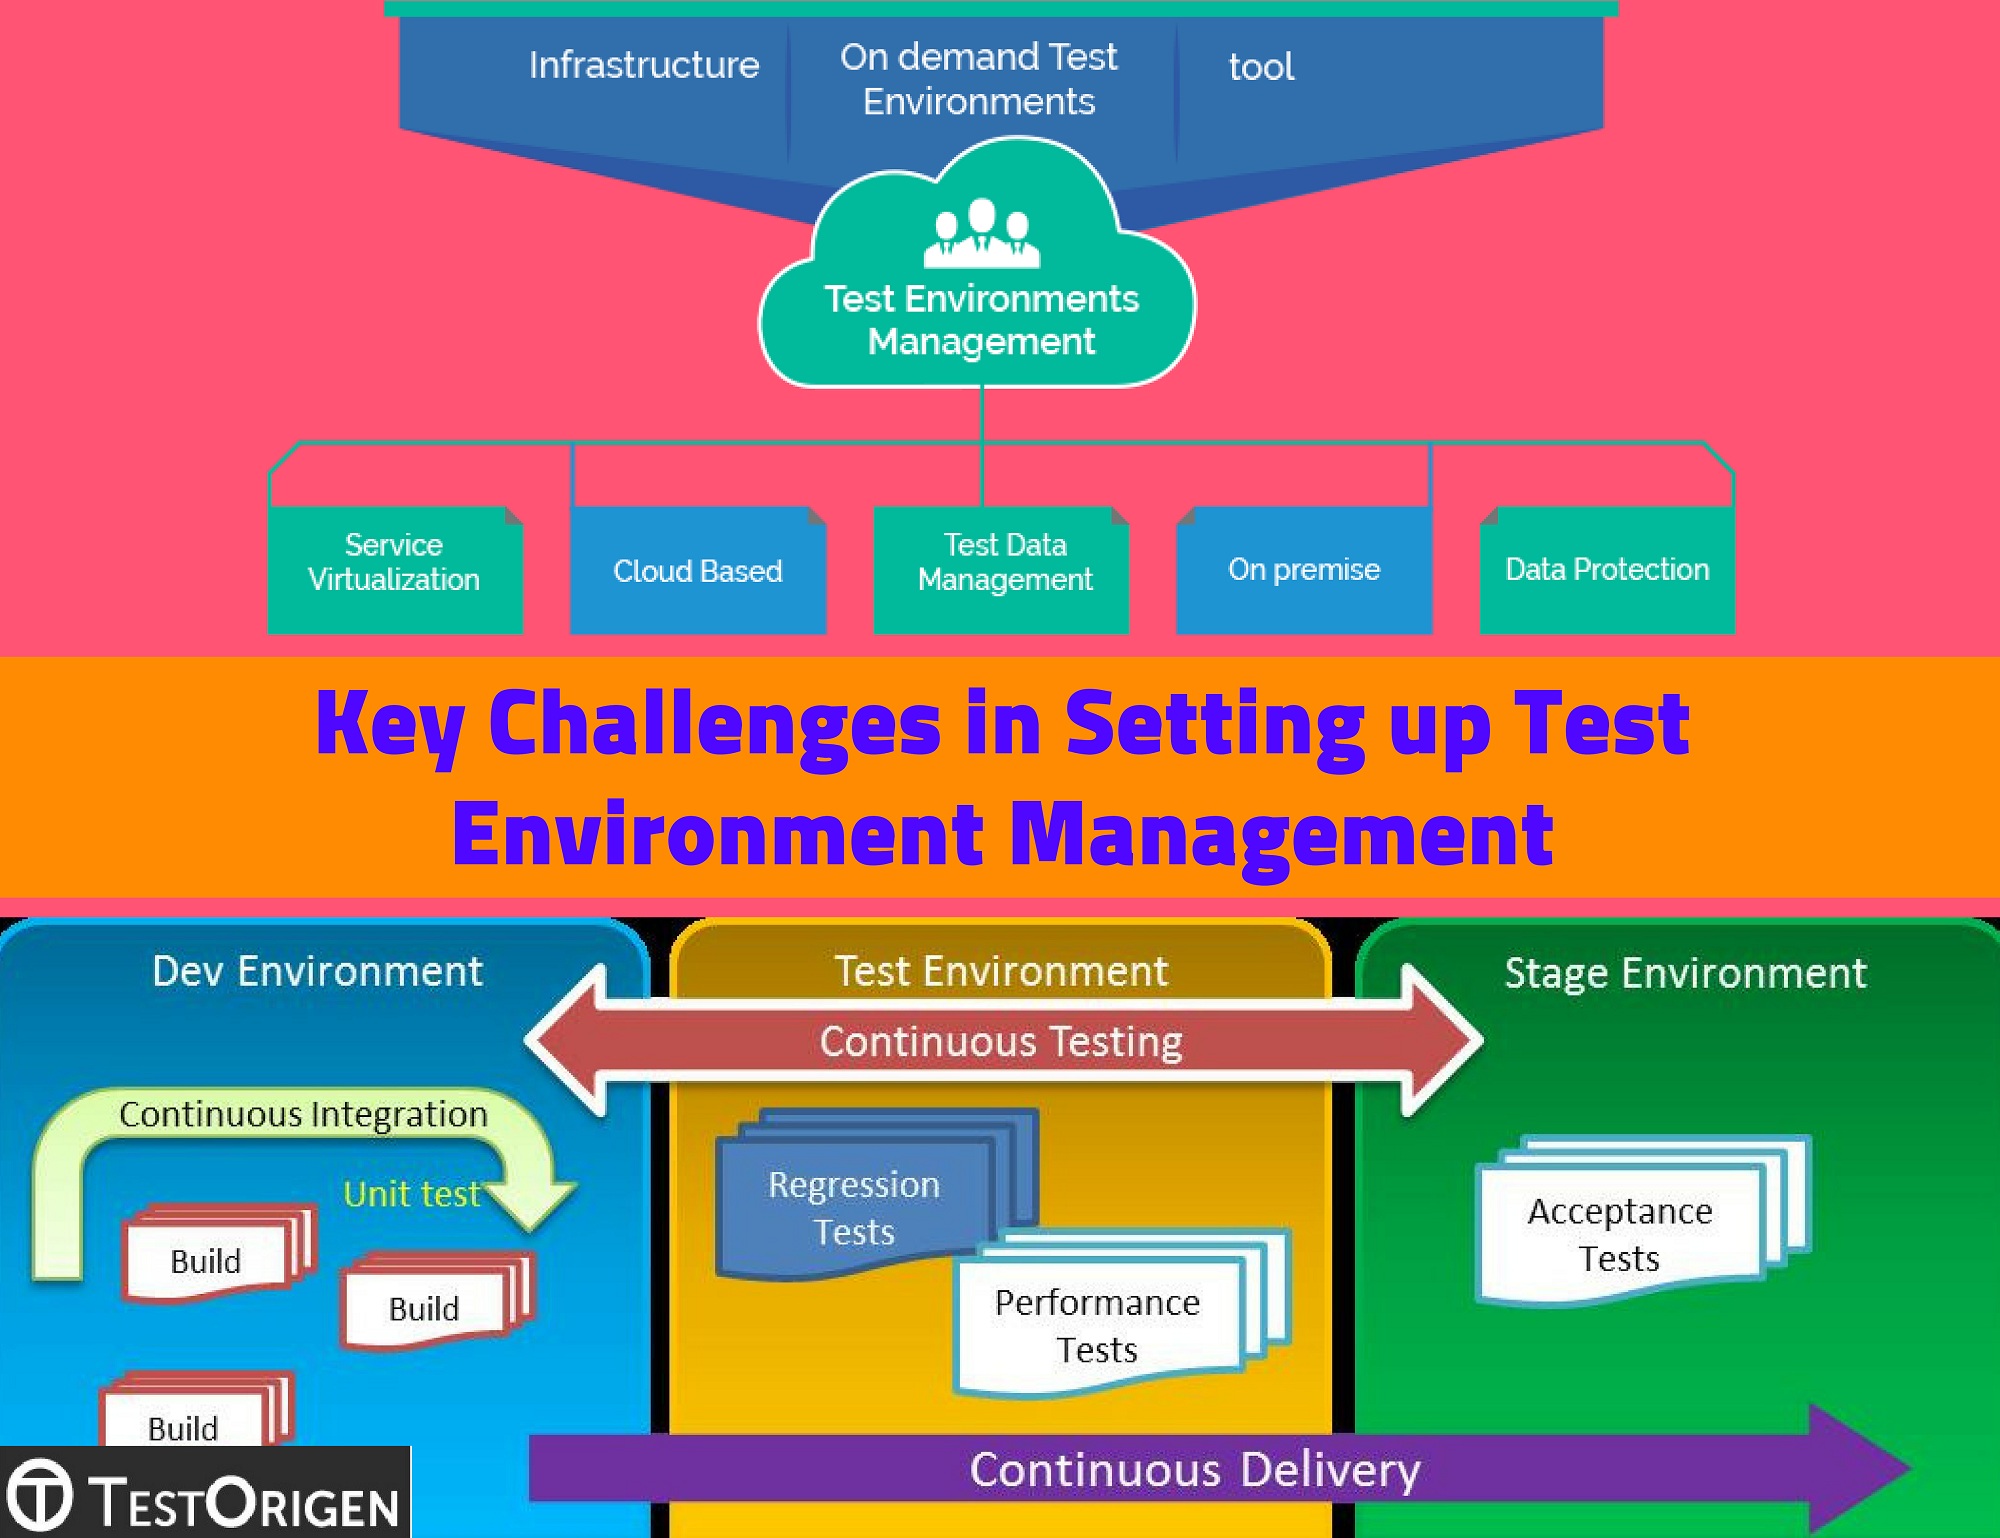 Key Challenges in Setting up Test Environment Management